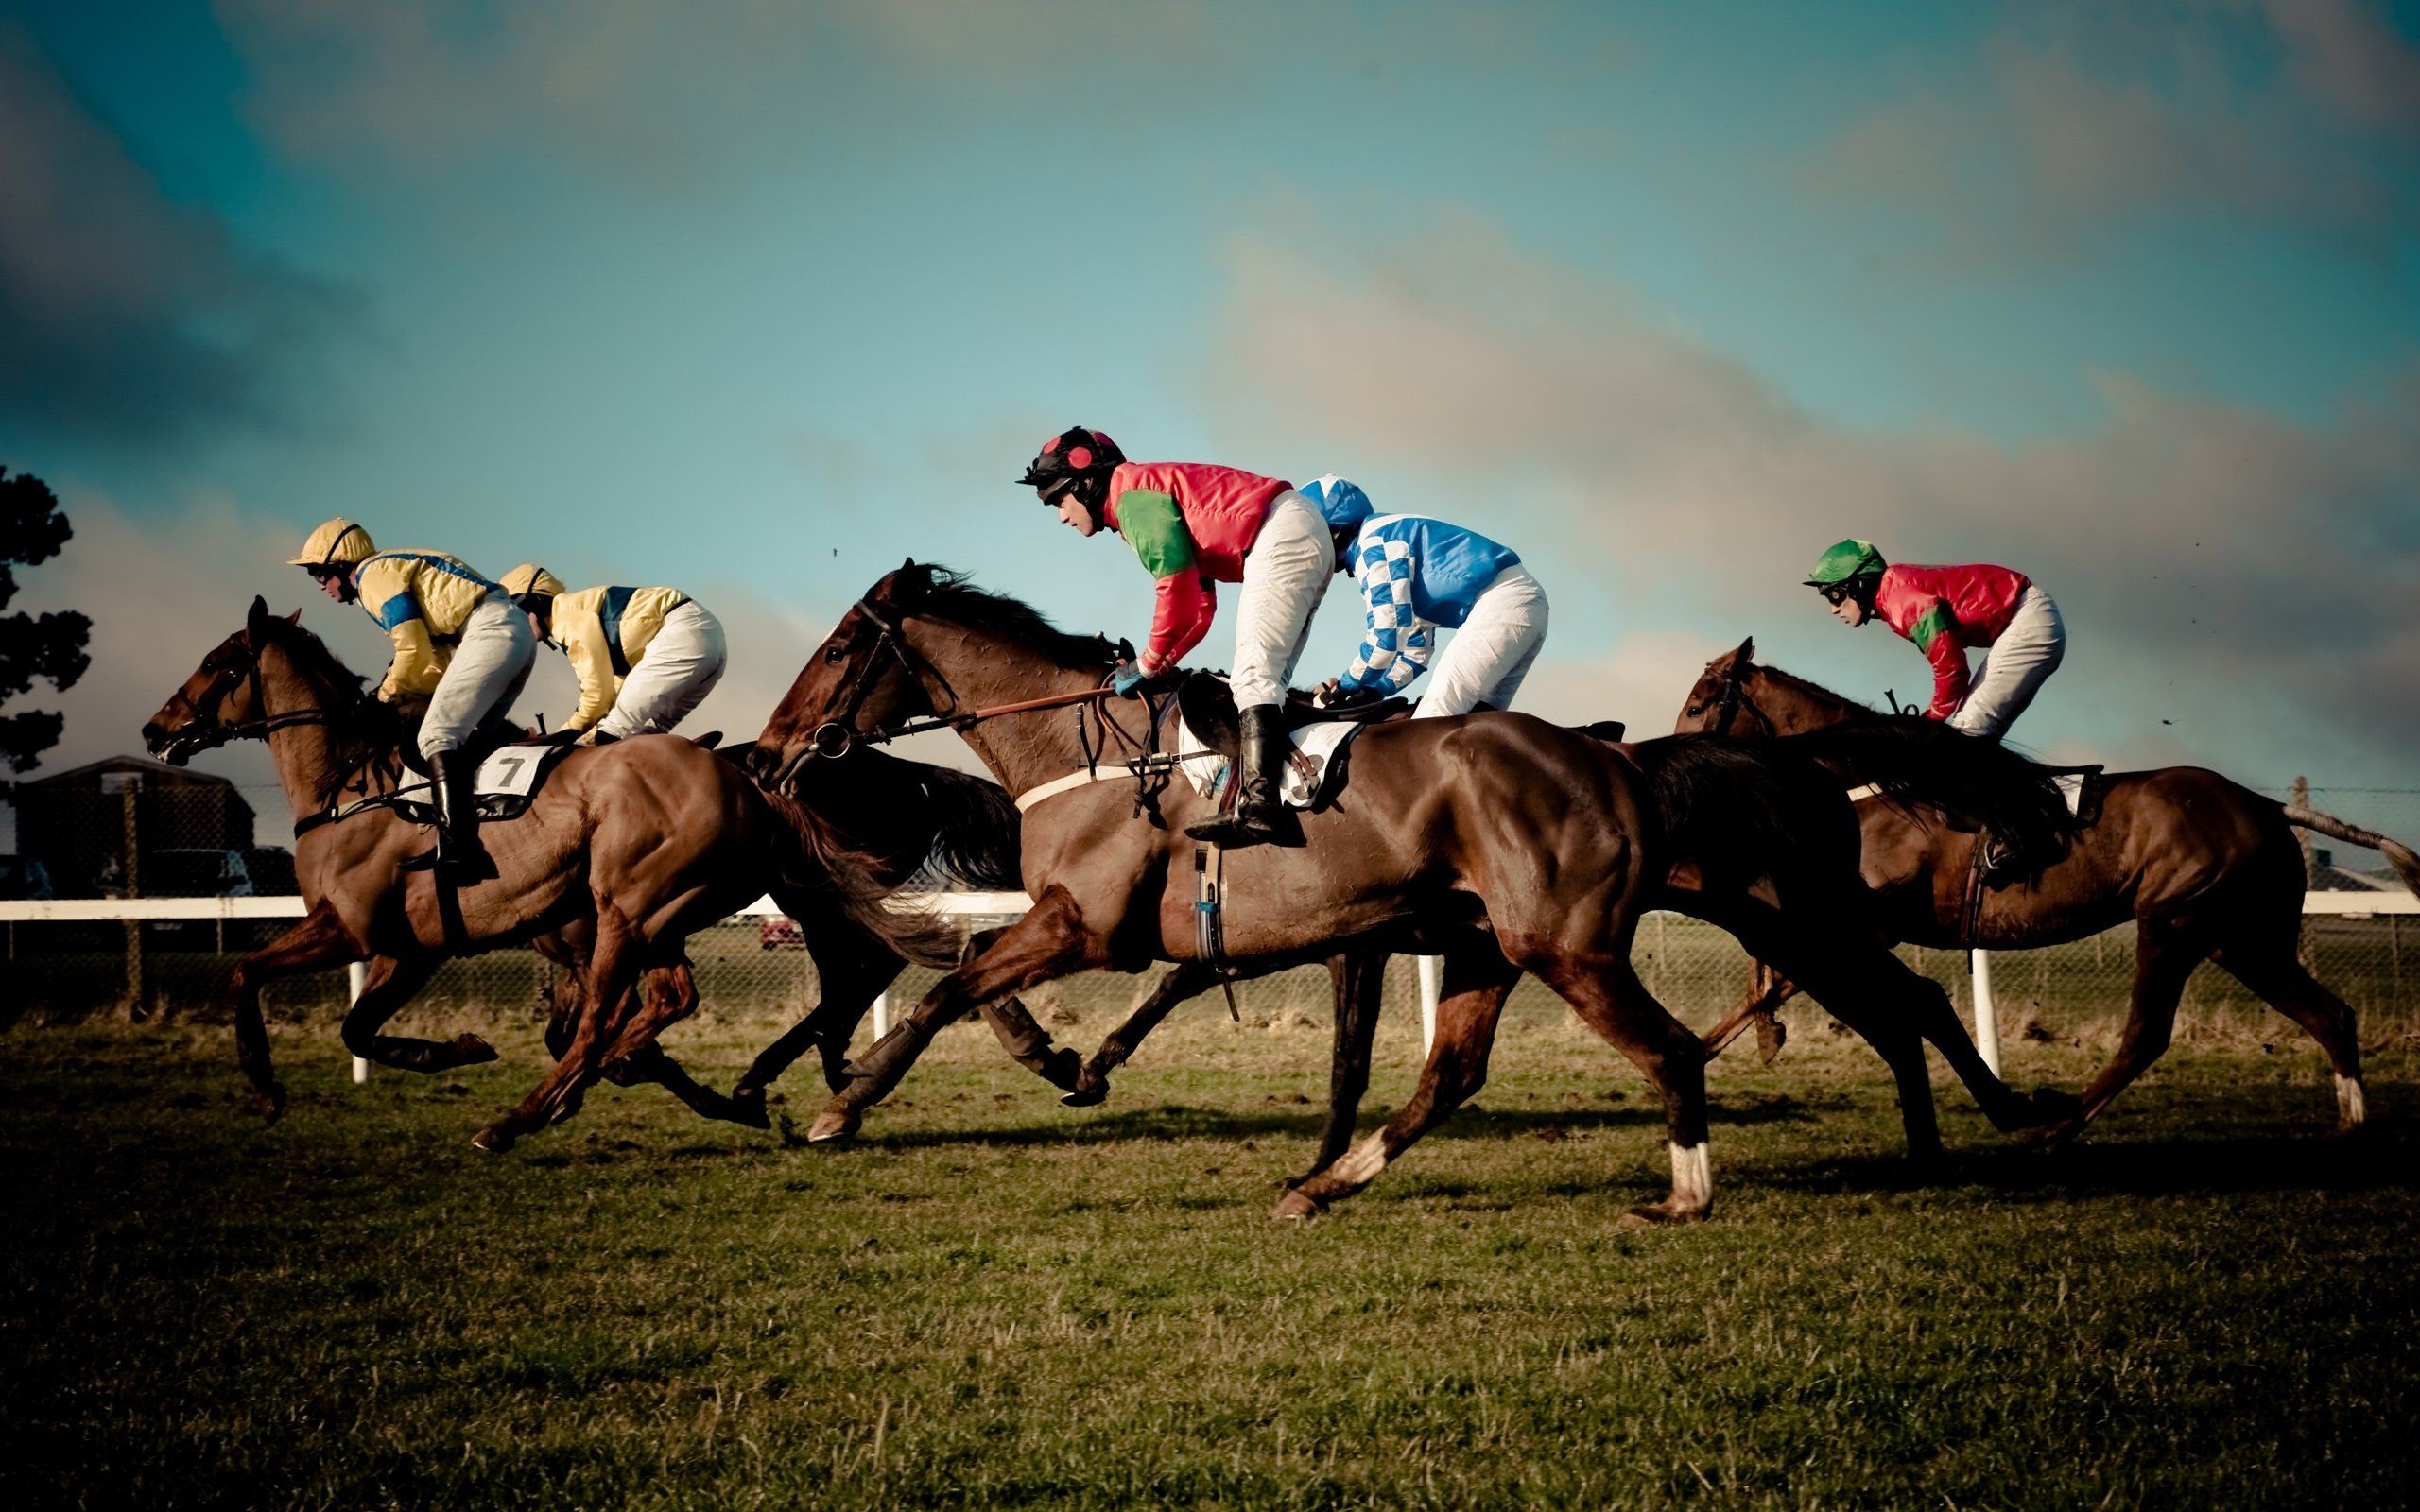 Horse Racing Wallpapers - Top Free Horse Racing Backgrounds 2560x1600